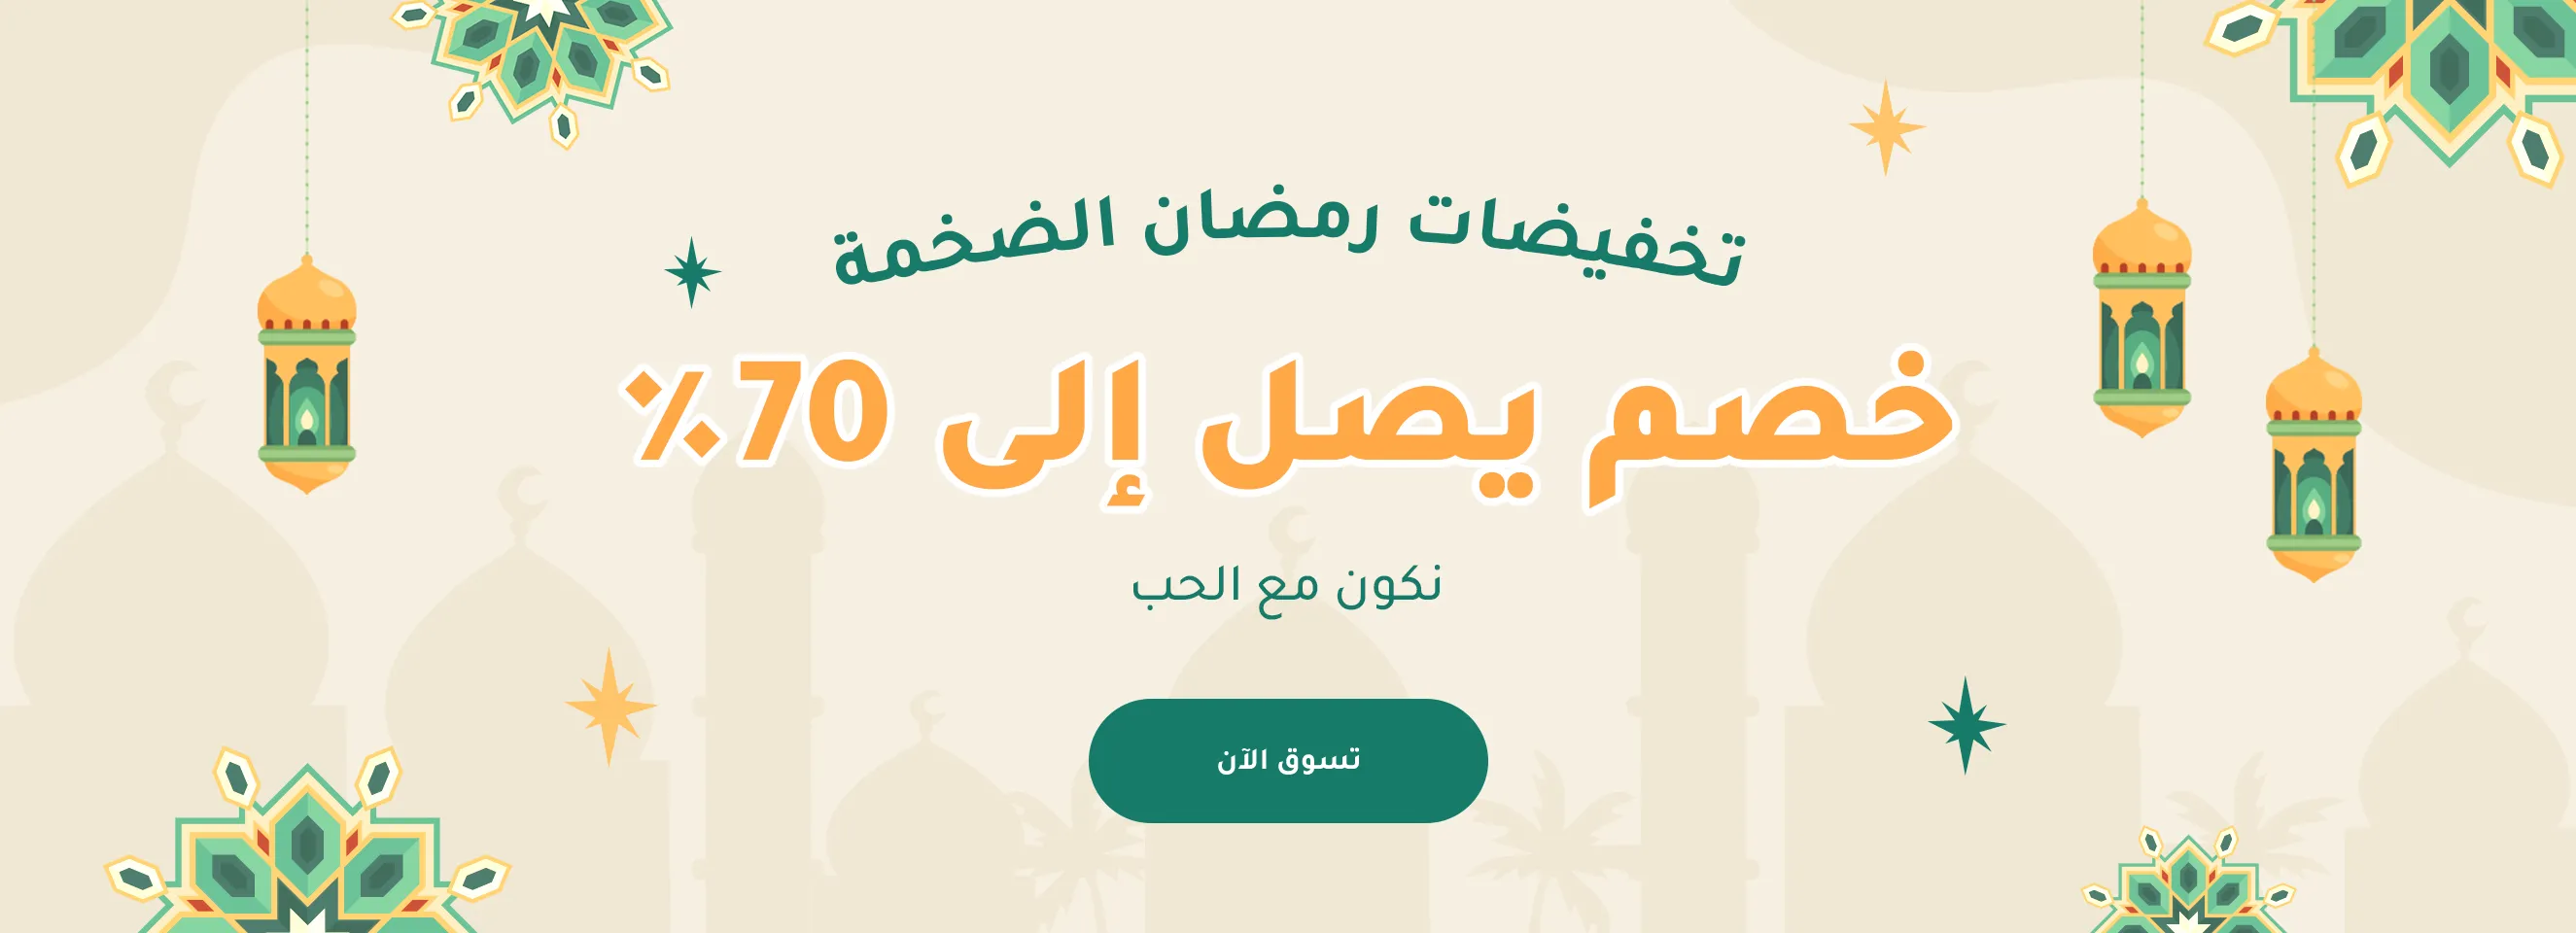 Click it to join Ramadan Sale activity